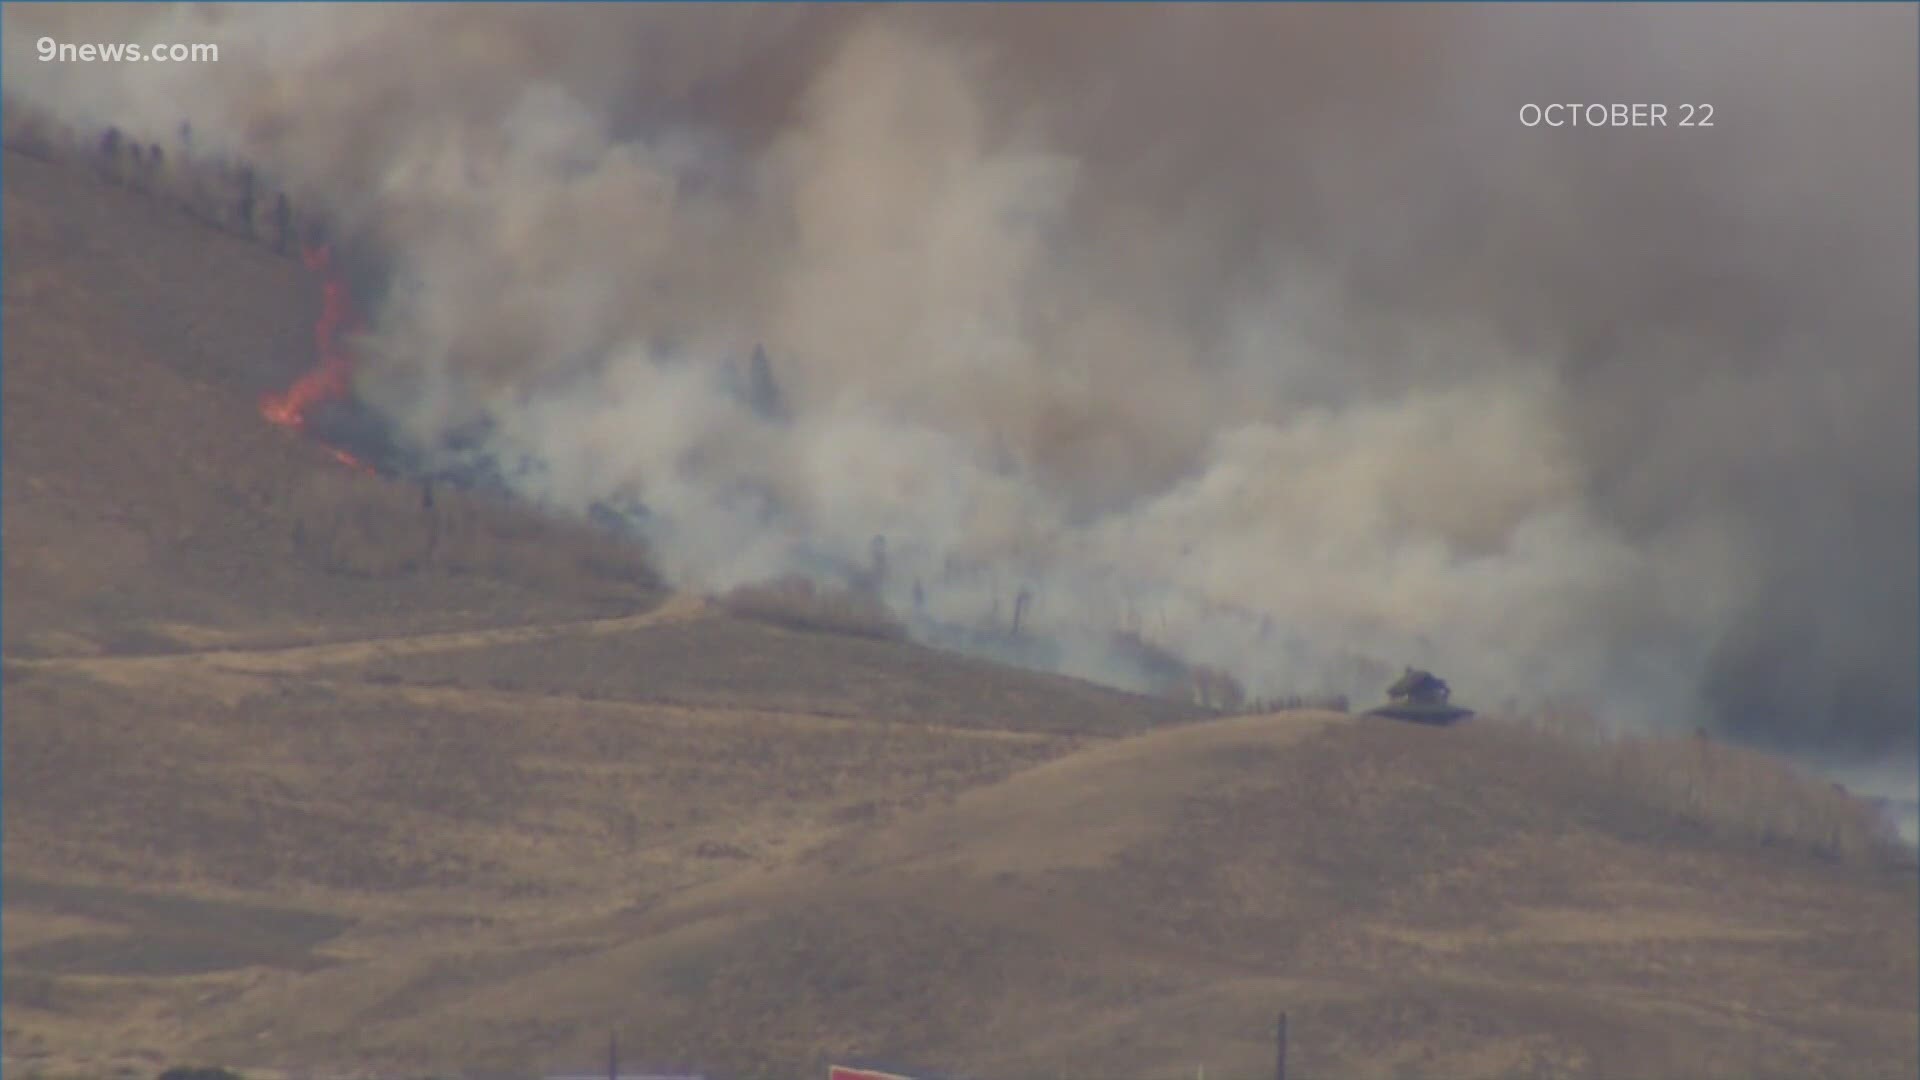 Burning 192,560 acres, the wildfire is the second largest in recorded Colorado history.